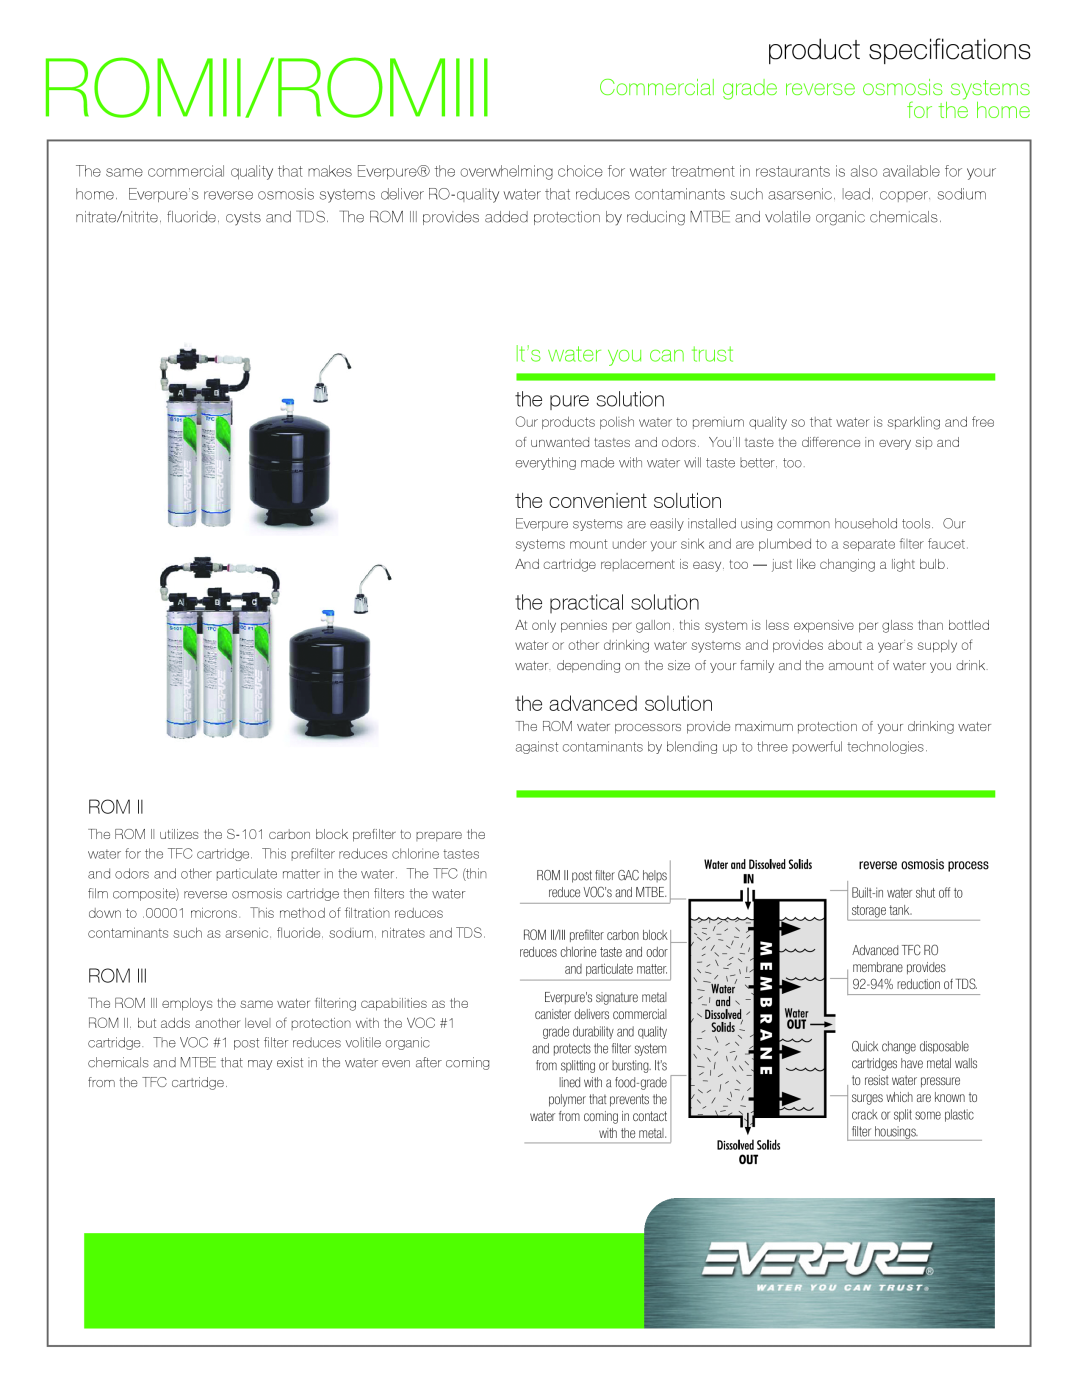 Everpure ROM III manual Romii/Romiii, for the home, Commercial grade reverse osmosis systems, It’s water you can trust 